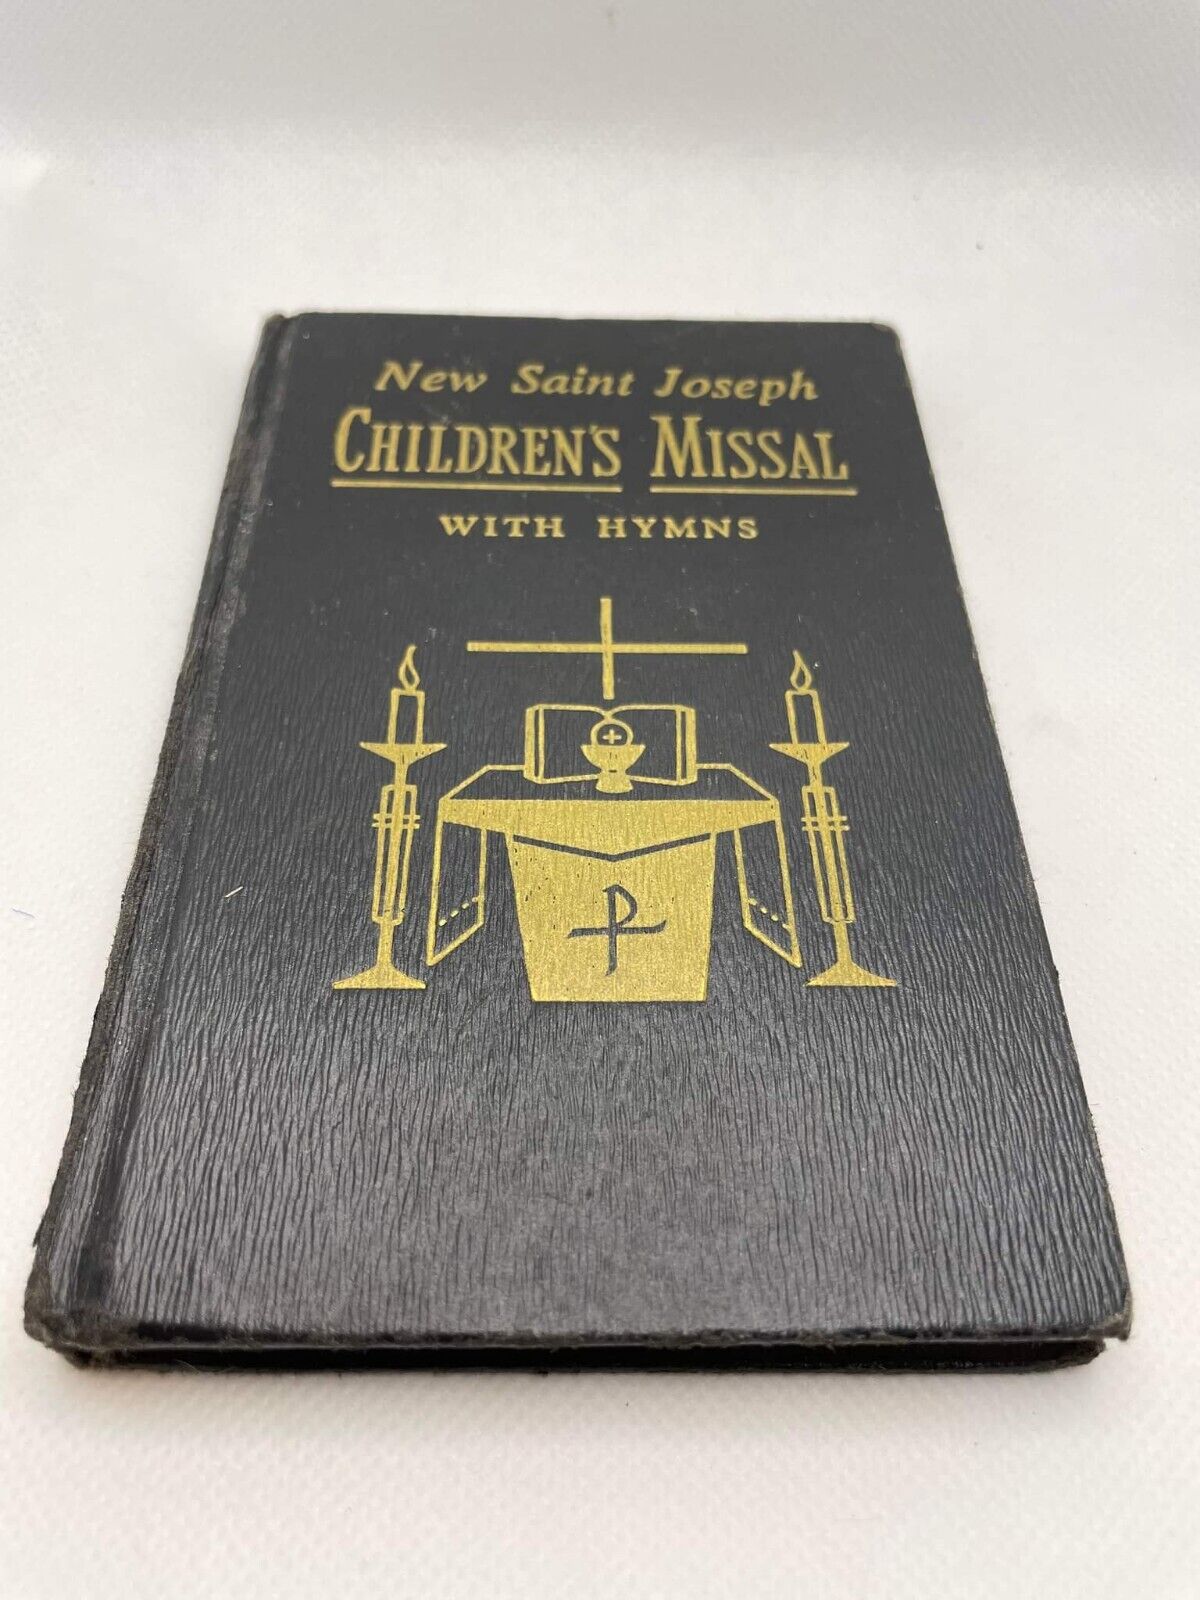 The New St Joseph Childrens Missal with Hymns 1965 Catholic Book Publishing